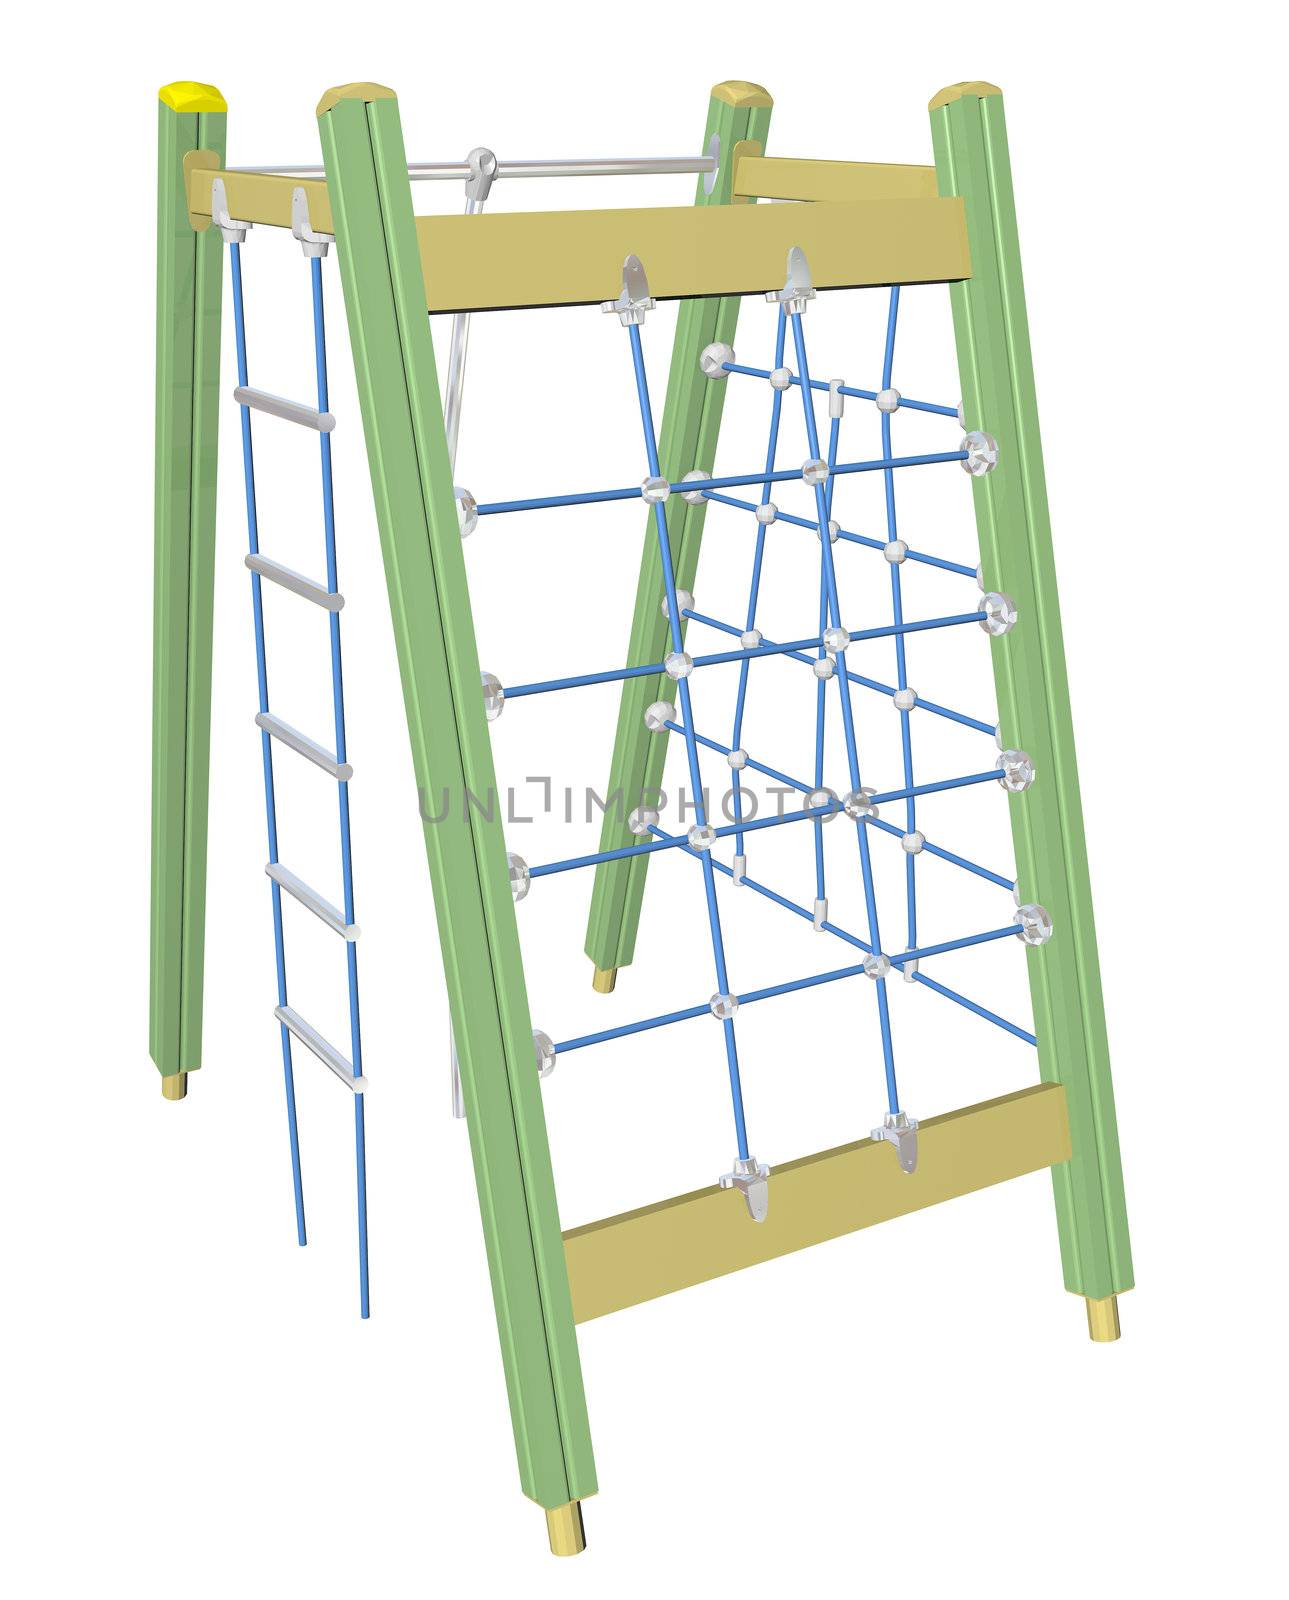 Play and climbing net, yellow green blue, 3D illustration, isolated against a white background.